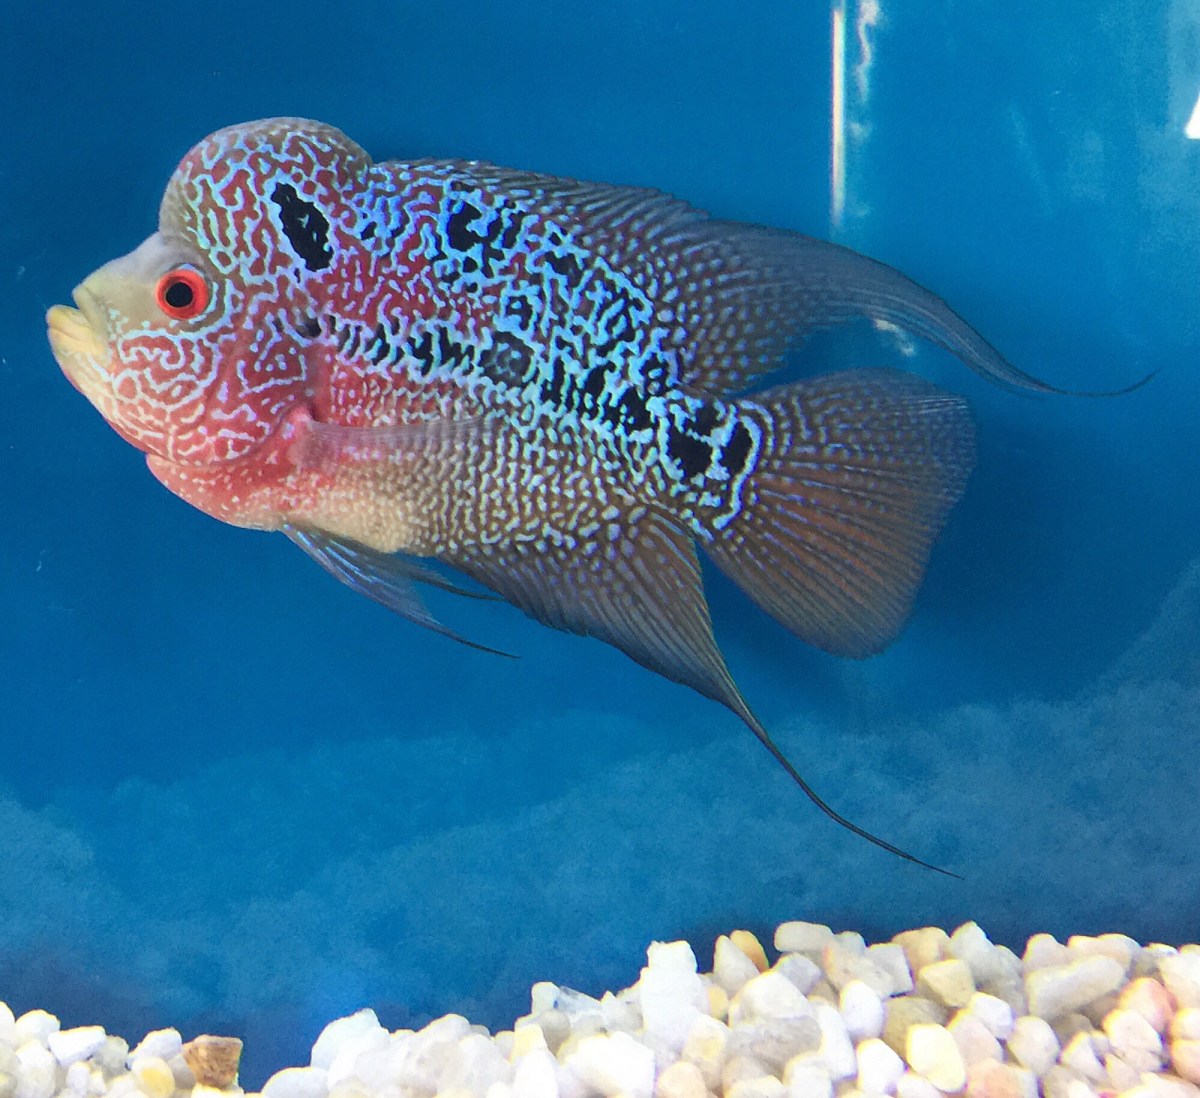 Flowerhorn cichlid. 3 Top 10 Most Beautiful Colorful Fish Types - 8